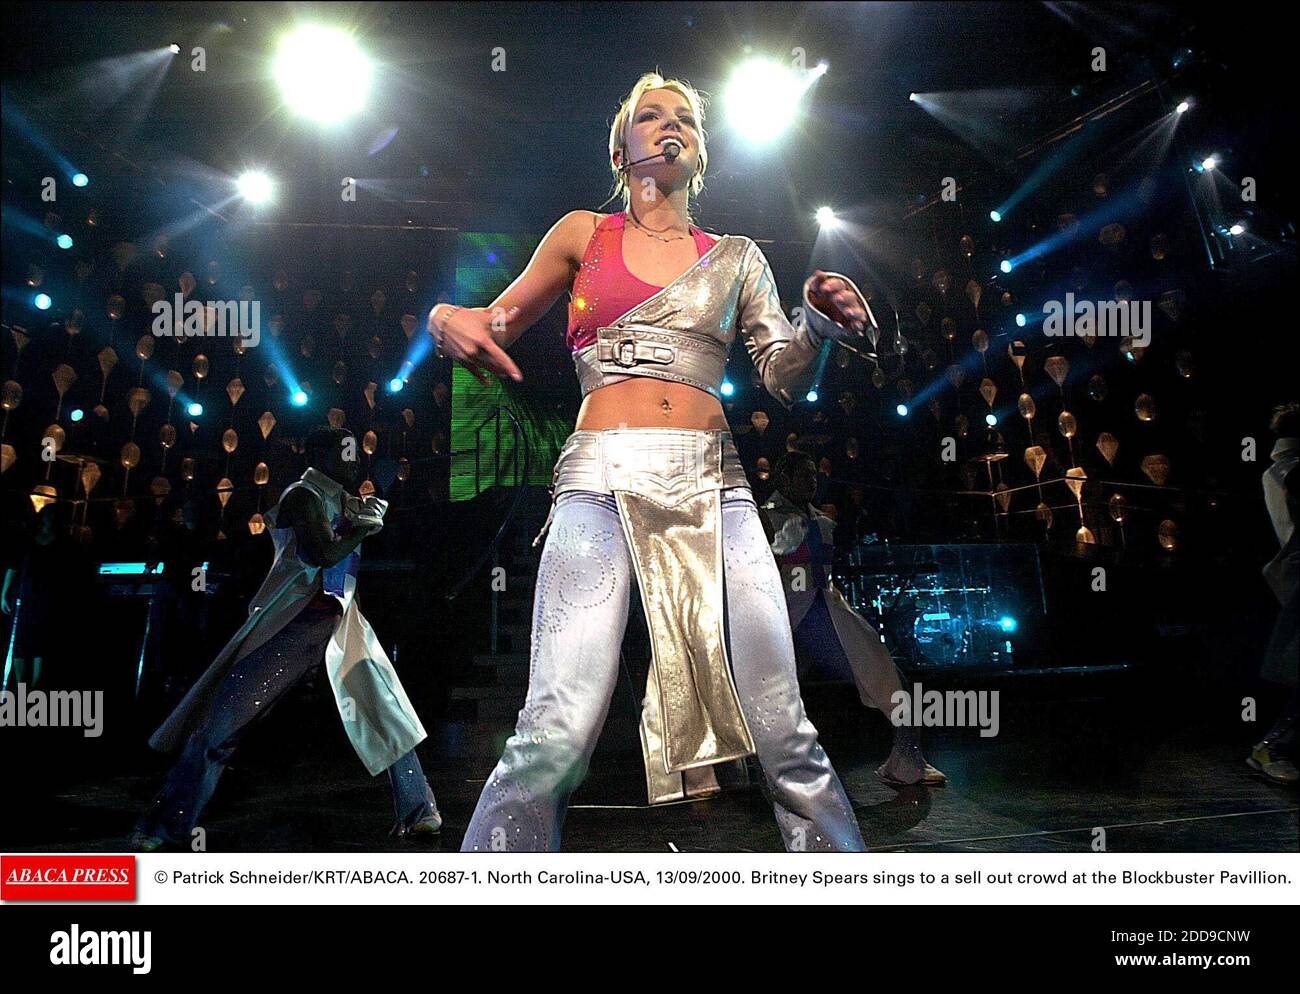 NO FILM, NO VIDEO, NO TV, NO DOCUMENTARY - © Patrick Schneider/KRT/ABACA. 20687-1. North Carolina-USA, 13/09/2000. Britney Spears sings to a sell out crowd at the Blockbuster Pavillion. Stock Photo